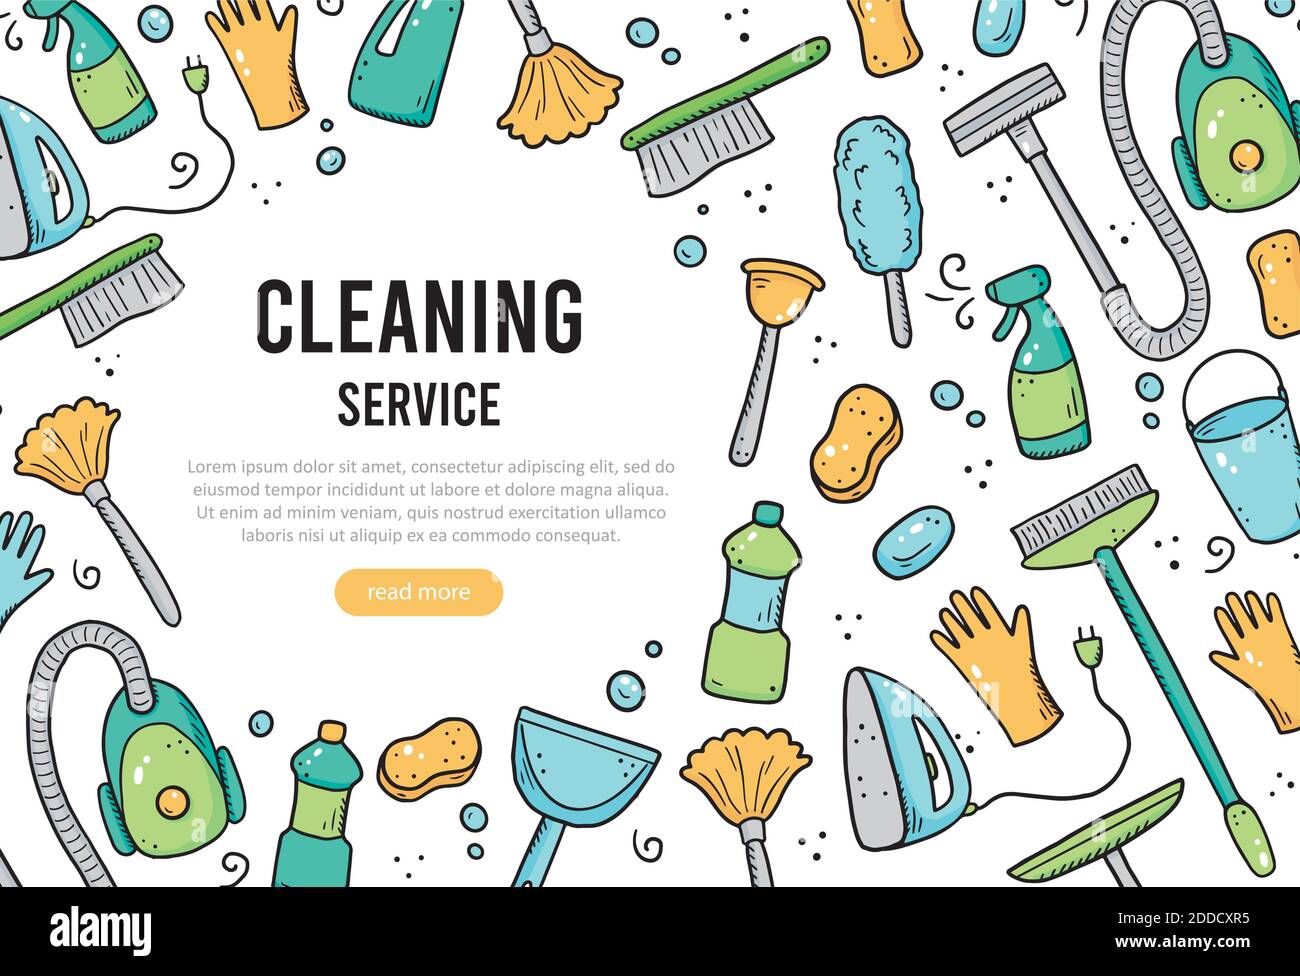 hand drawn design template of cleaning equipments sponge vacuum spray broom bucket doodle sketch style clean element drawn by digital brush pen illustration for icon frame background banner 2DDCXR5